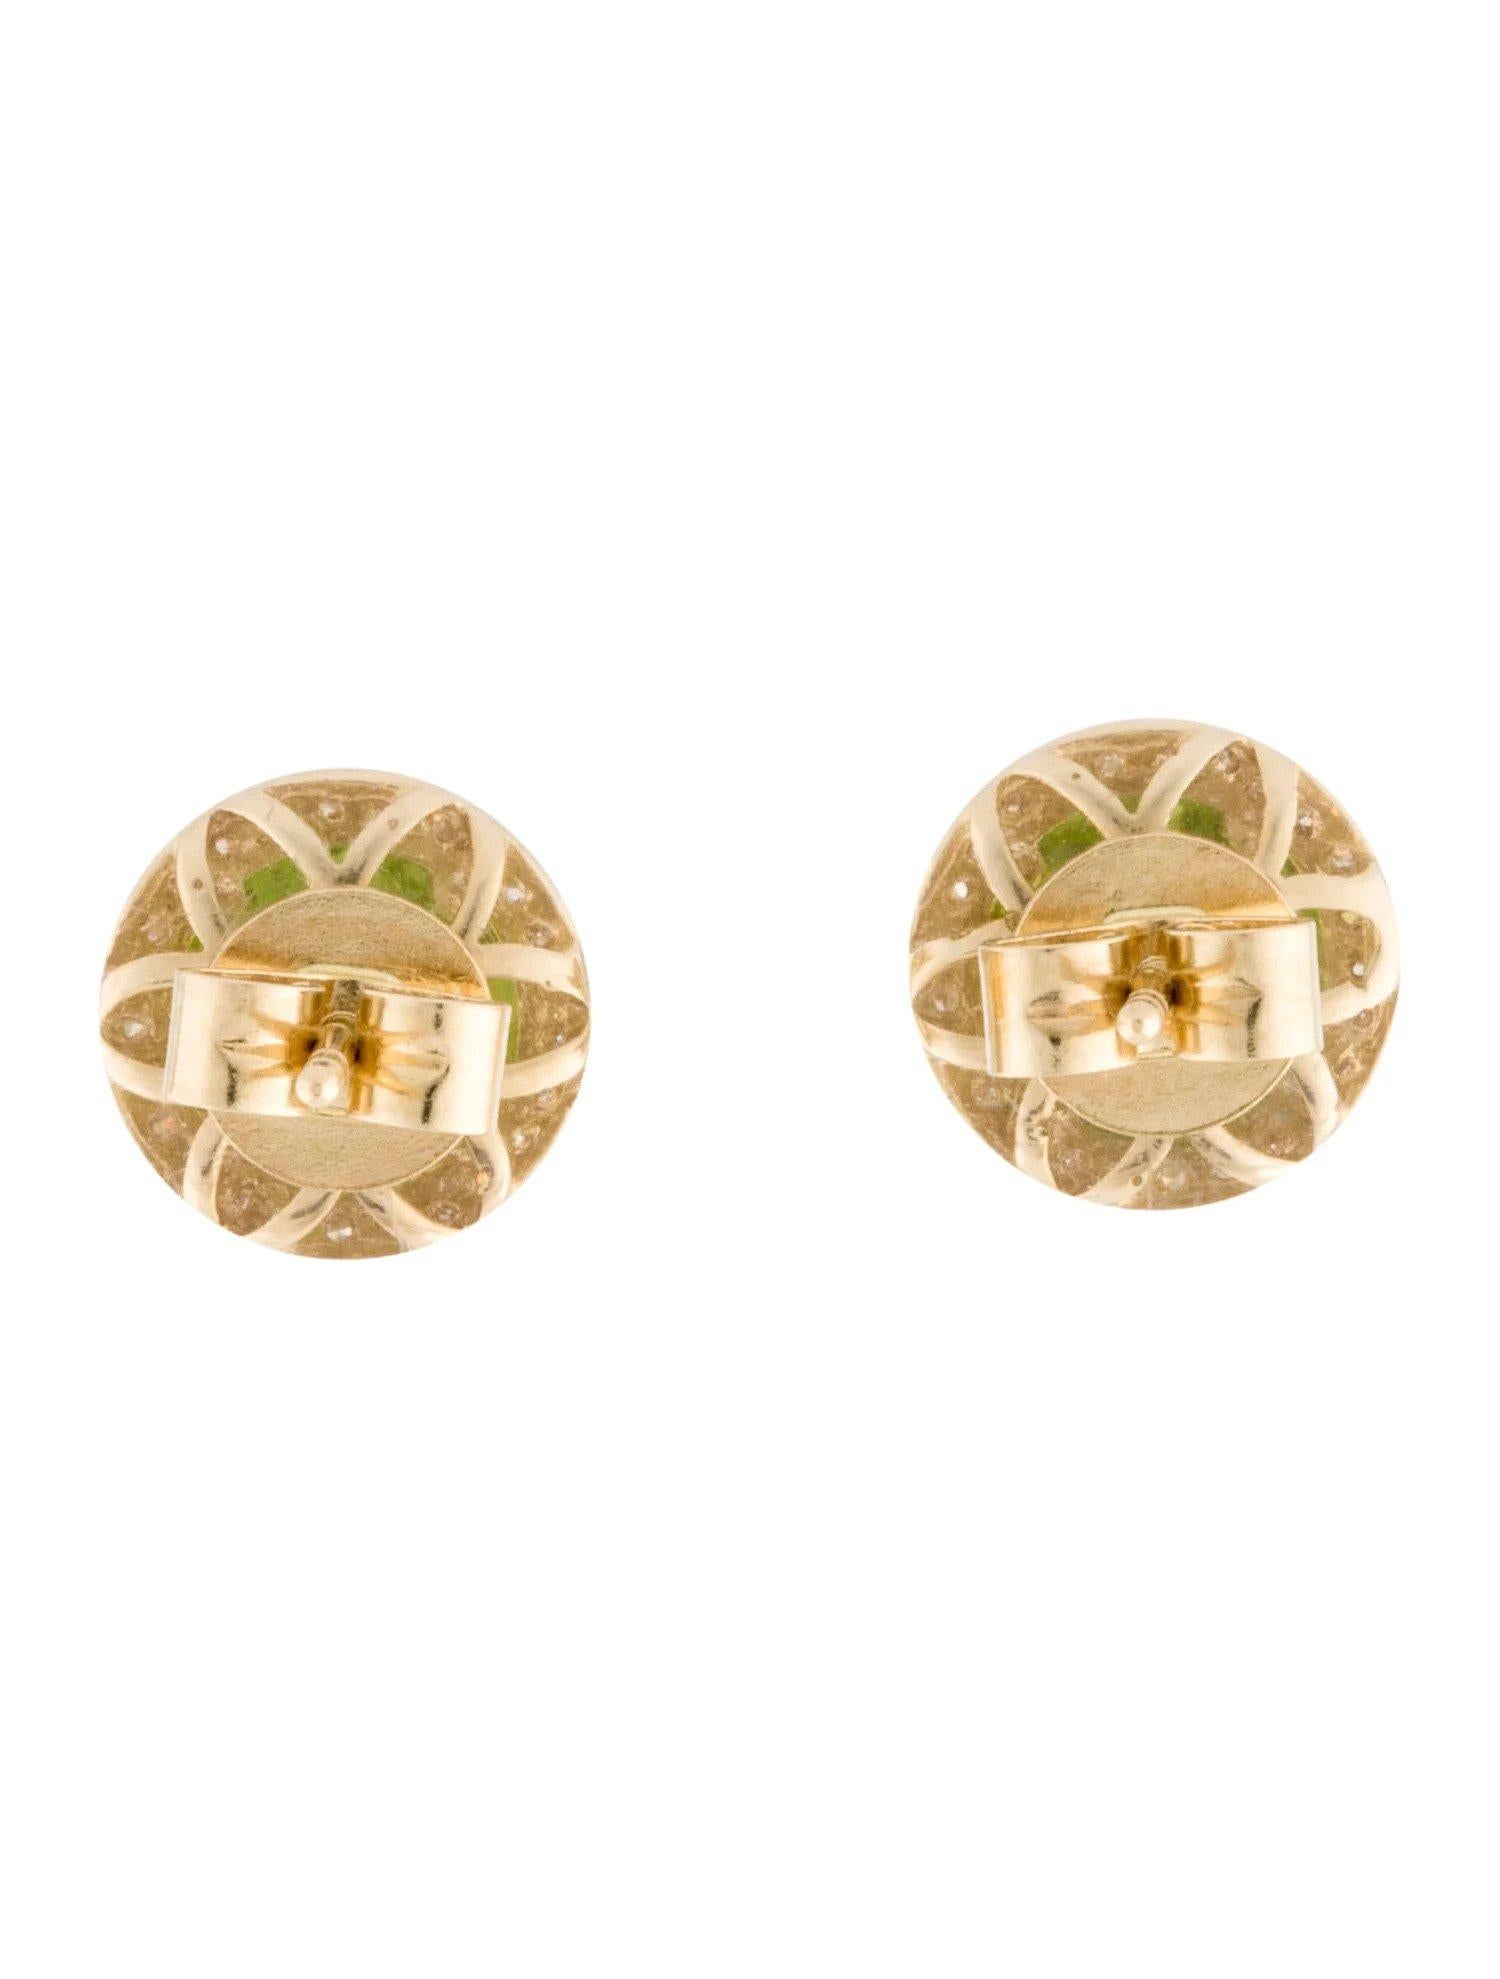 2.30 Carat Round Peridot & Diamond Yellow Gold Stud Earrings  In New Condition For Sale In Great Neck, NY